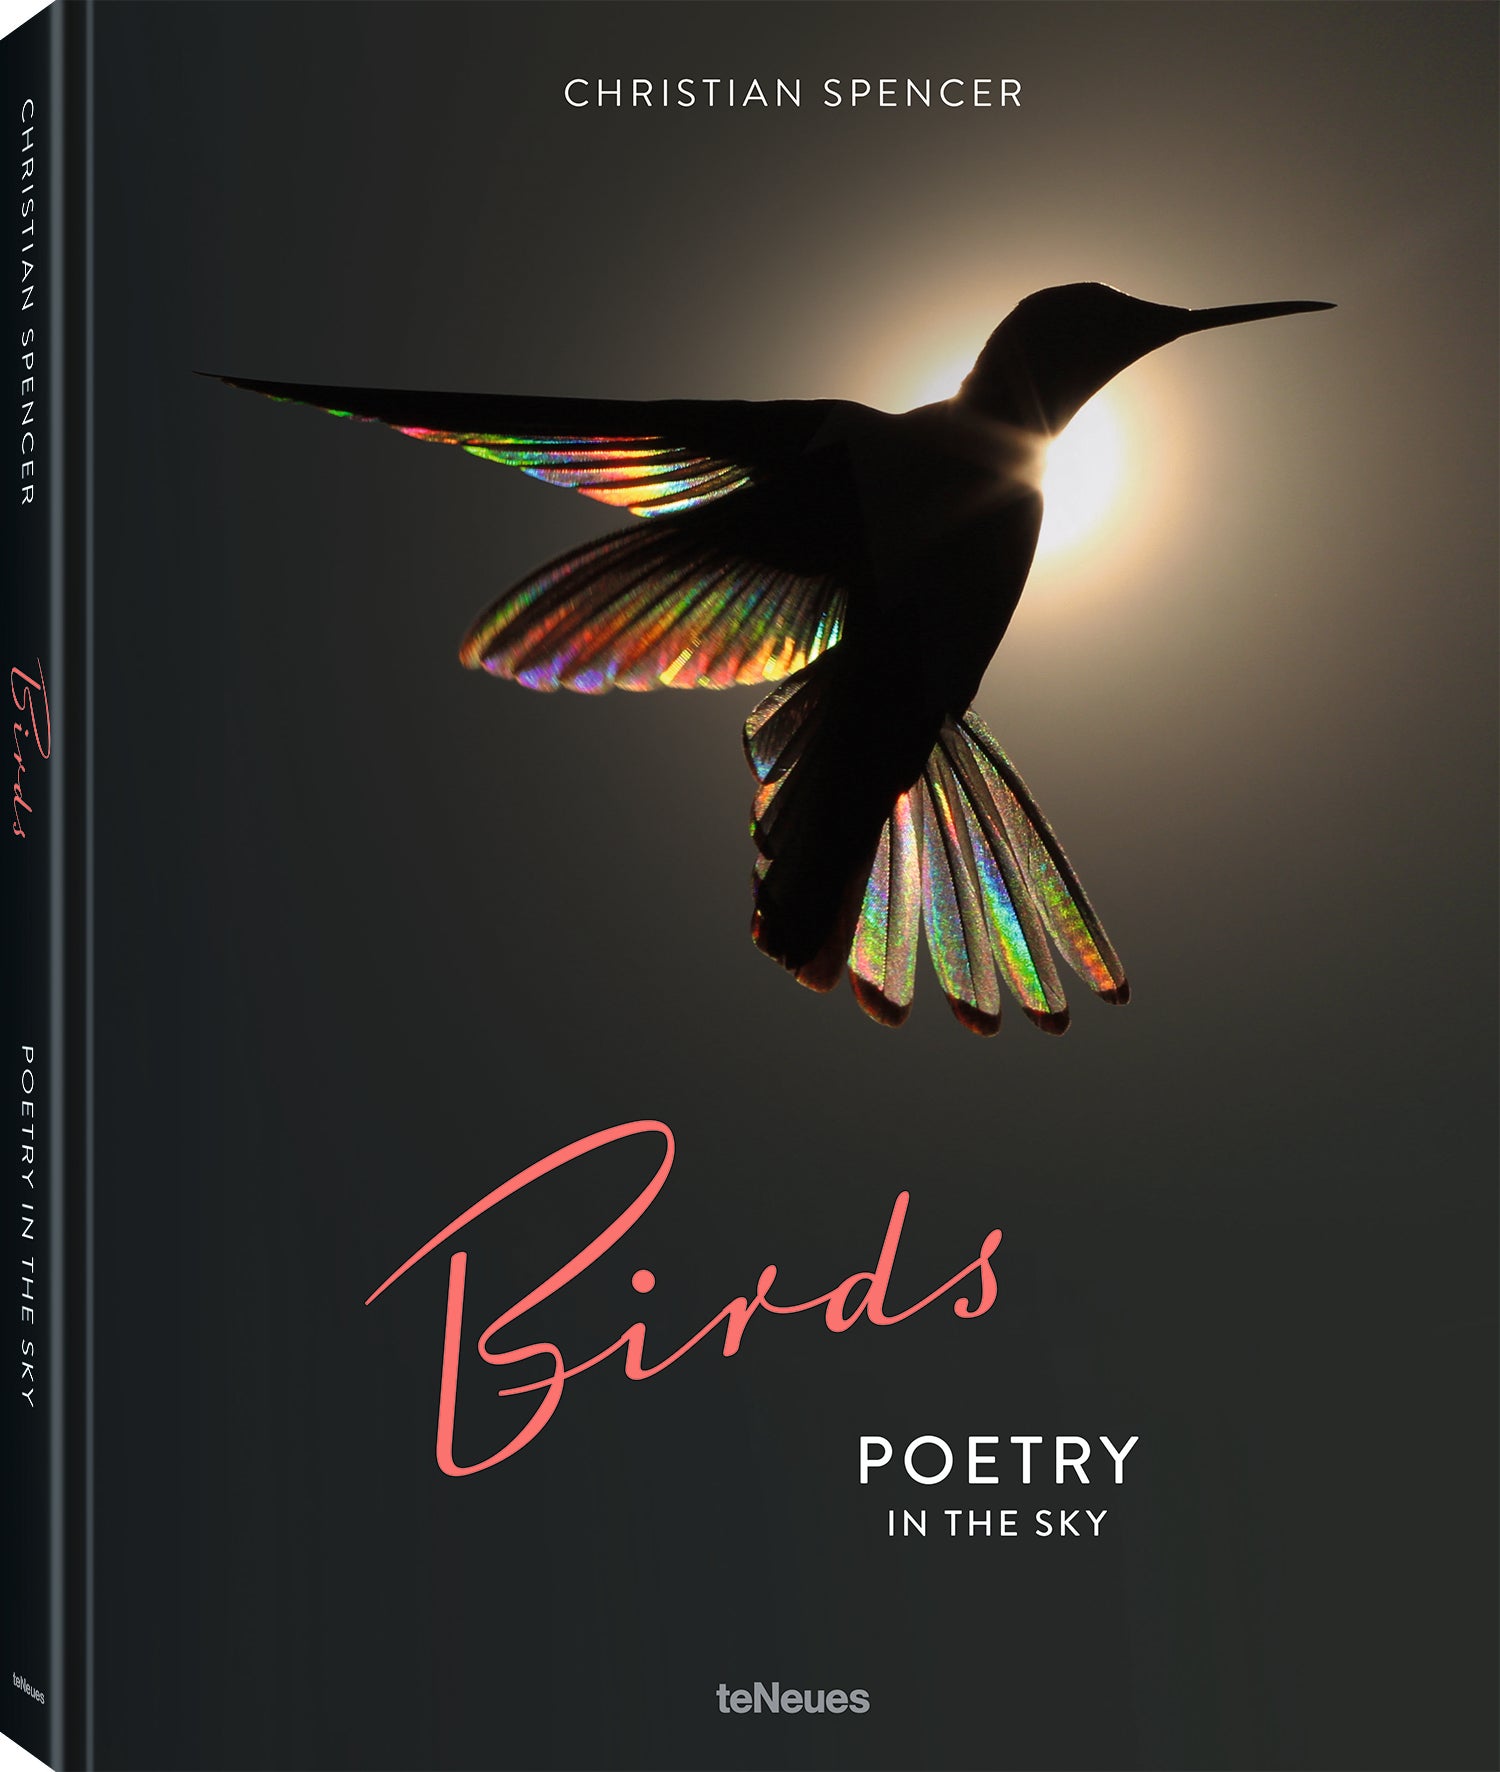 Poetry of Birds book cover with iridescent hummingbird silhouette on black